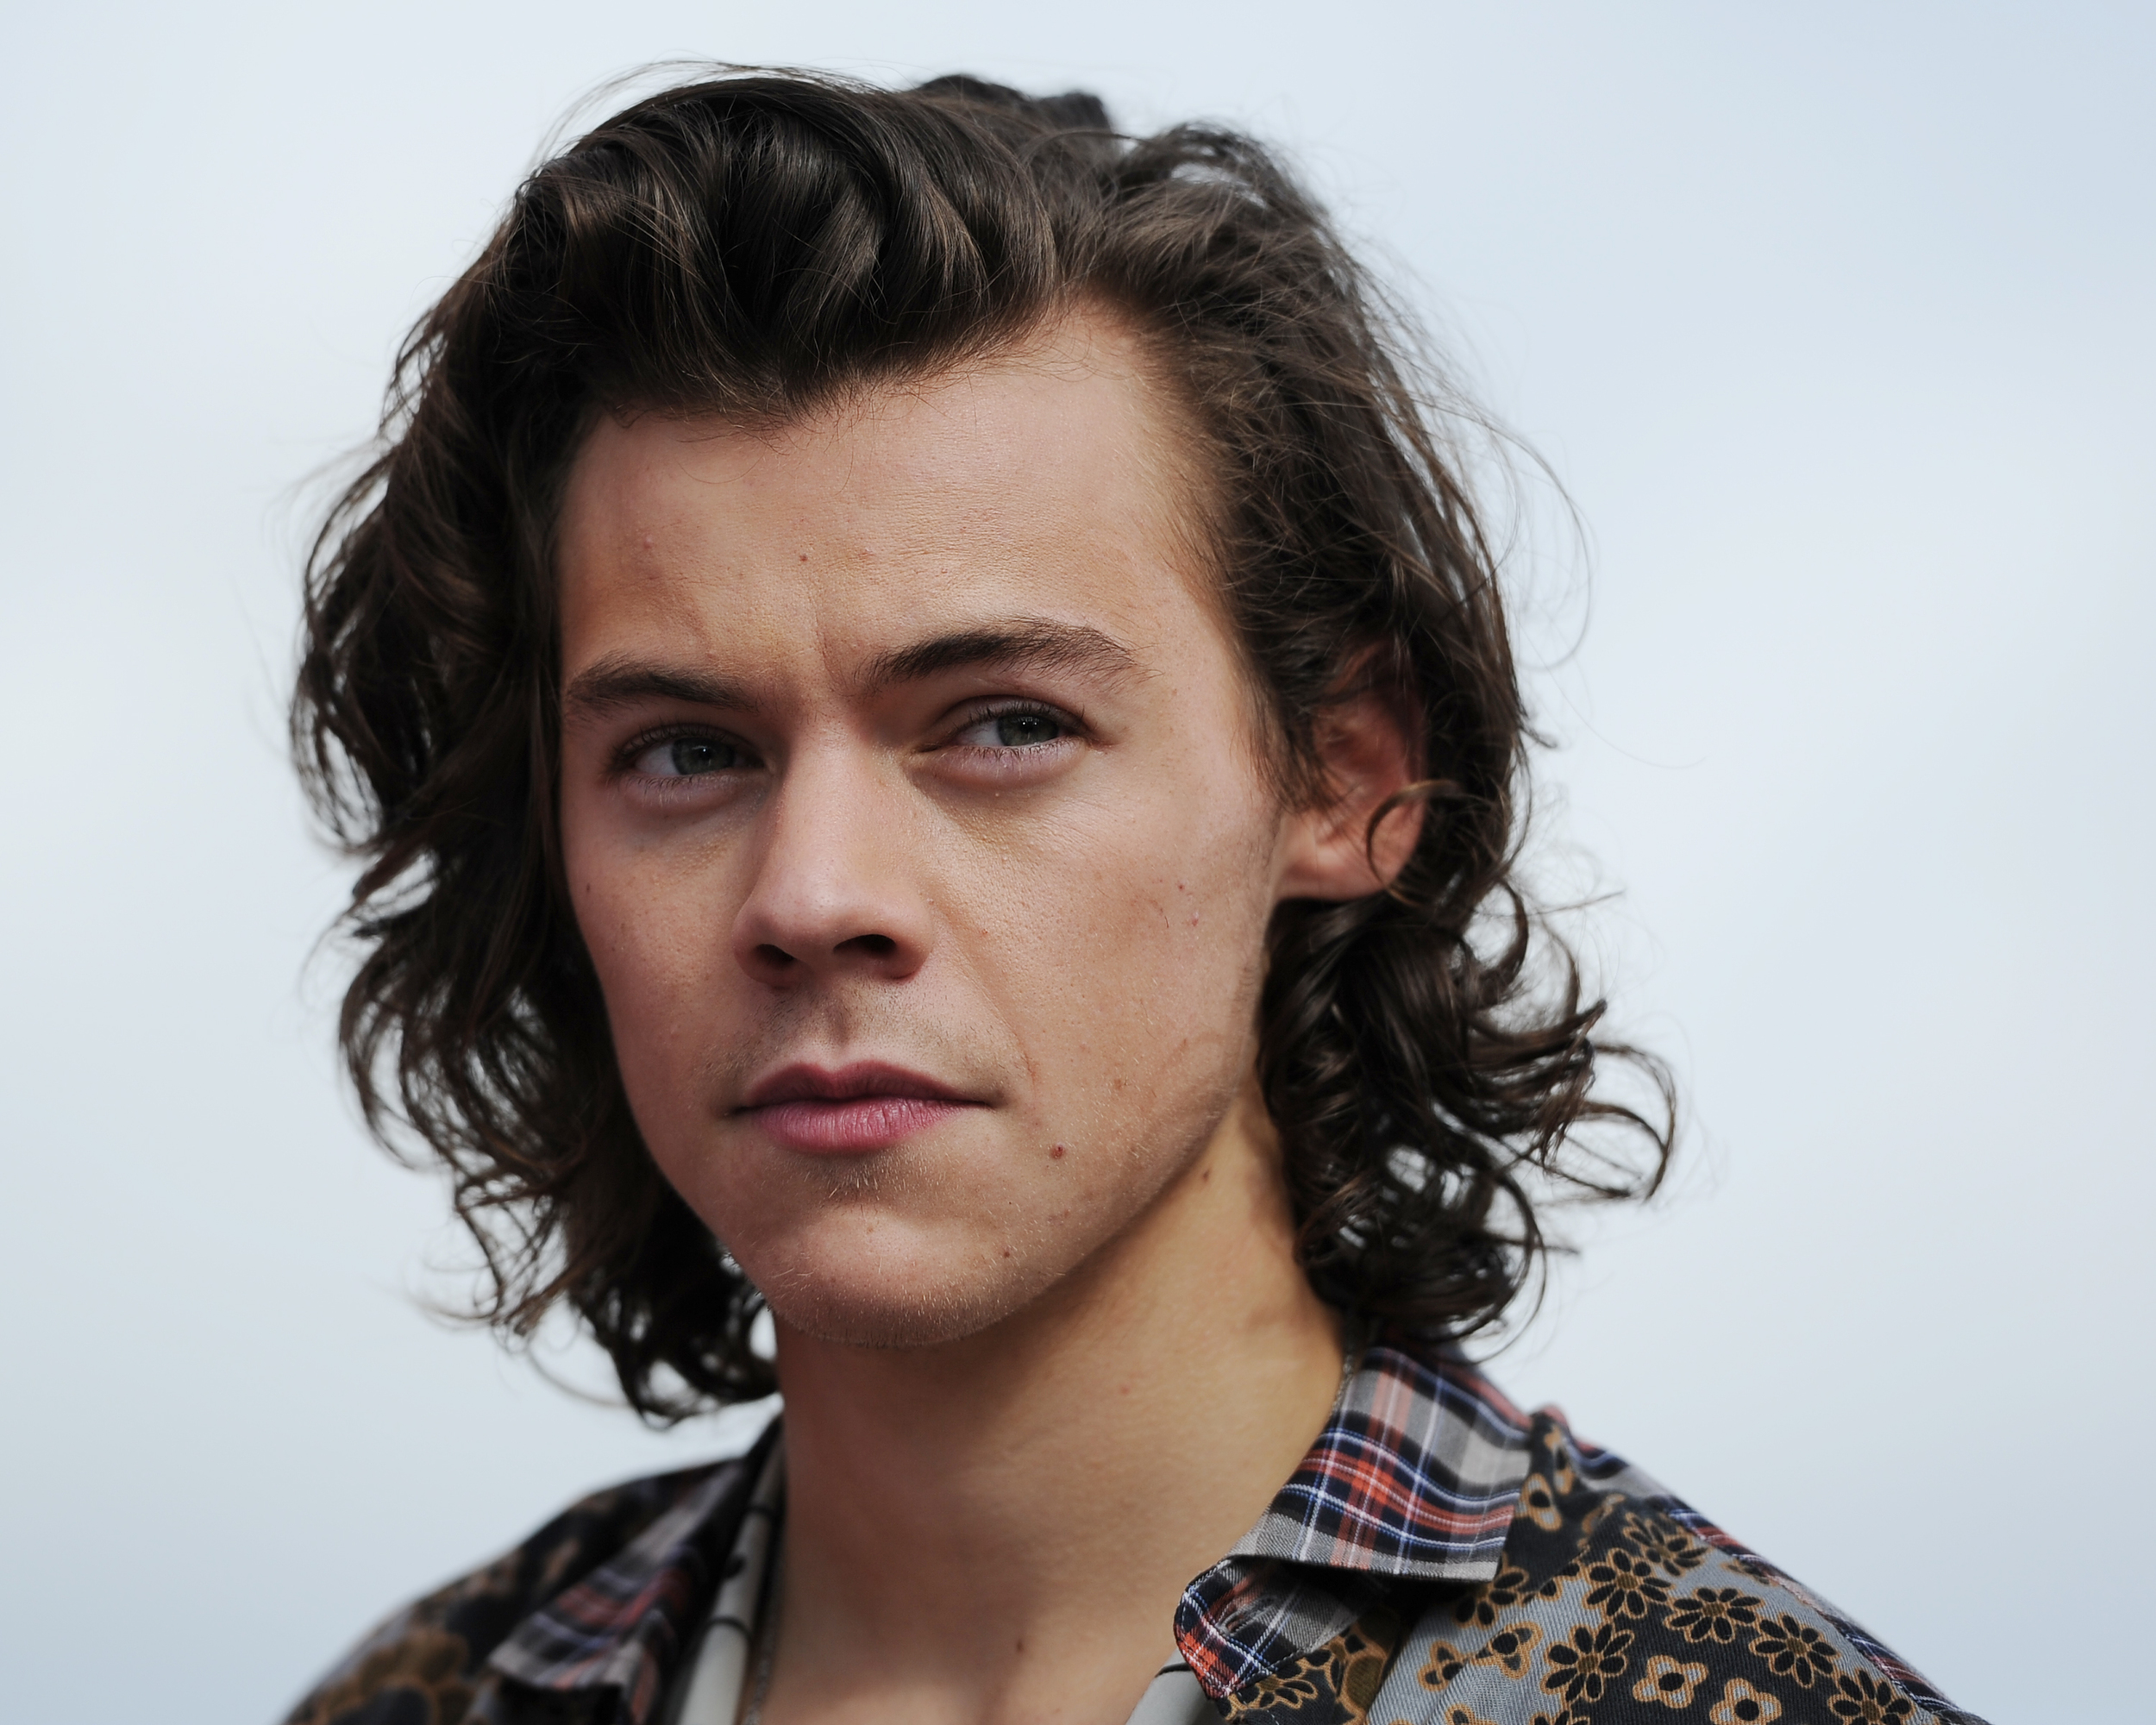 English Face Harry Styles Singer 2500x2000